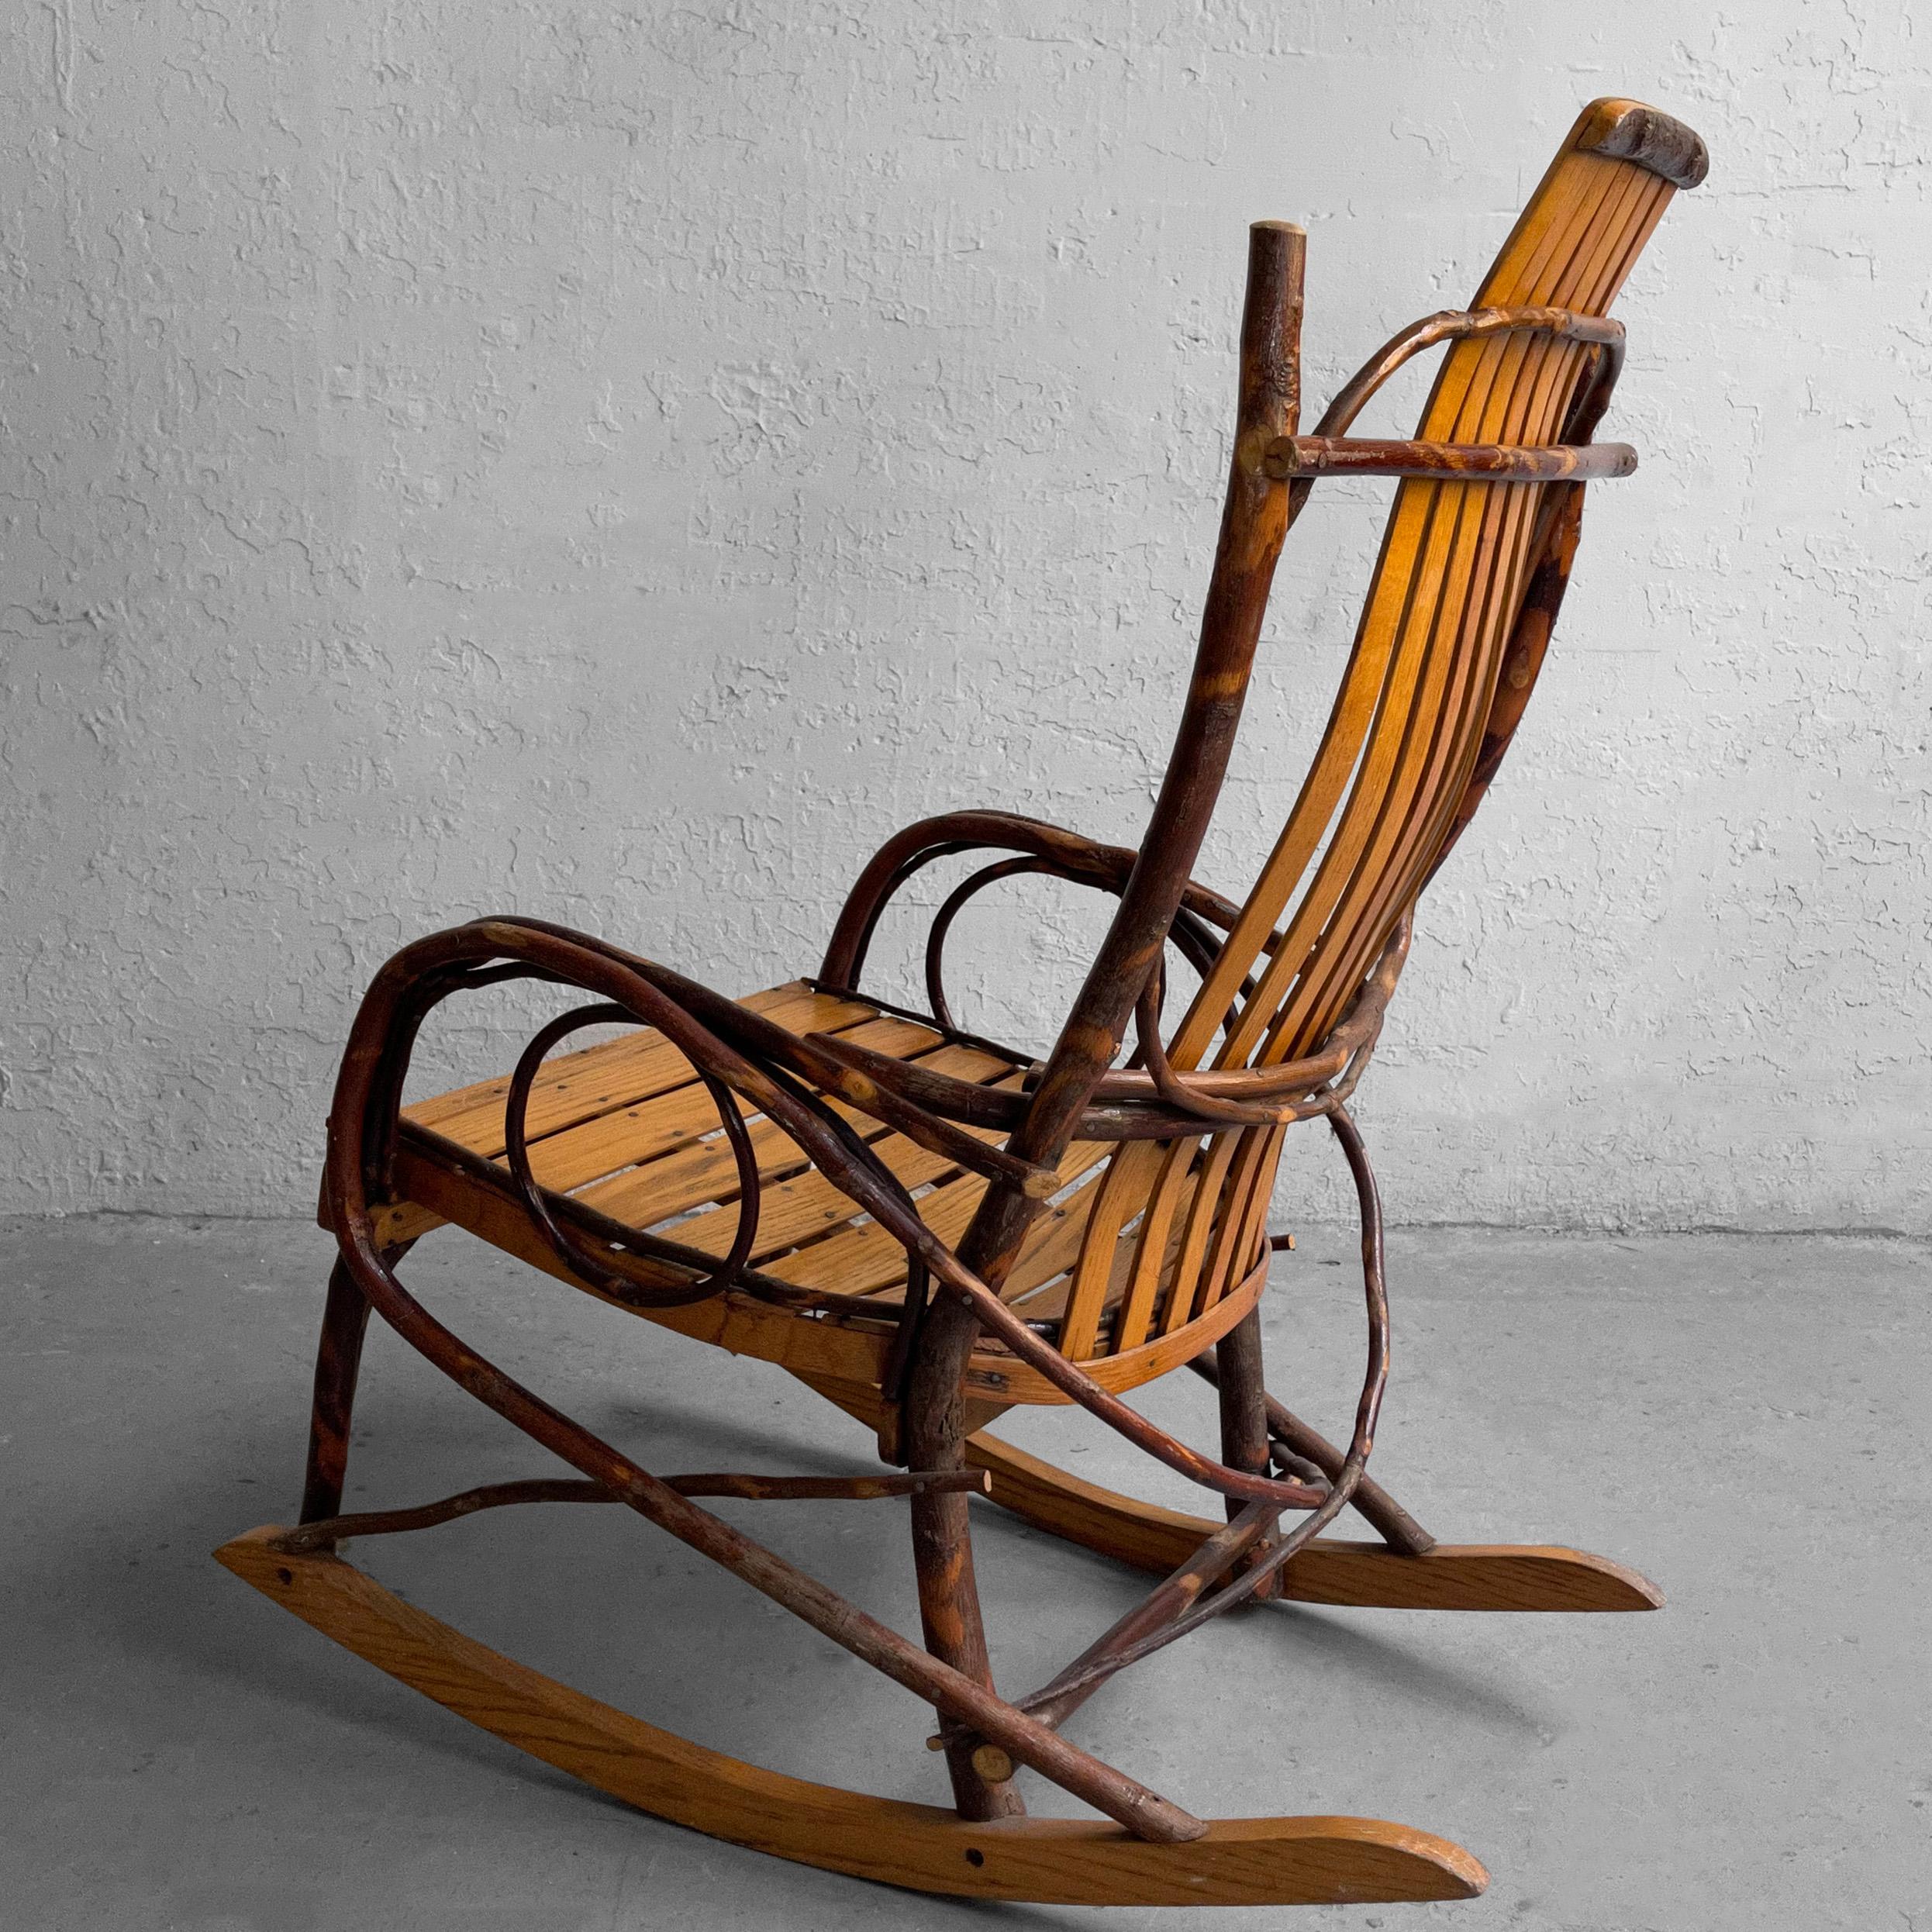 Rustic Primitive Adirondack Twig Rocking Chair In Good Condition For Sale In Brooklyn, NY